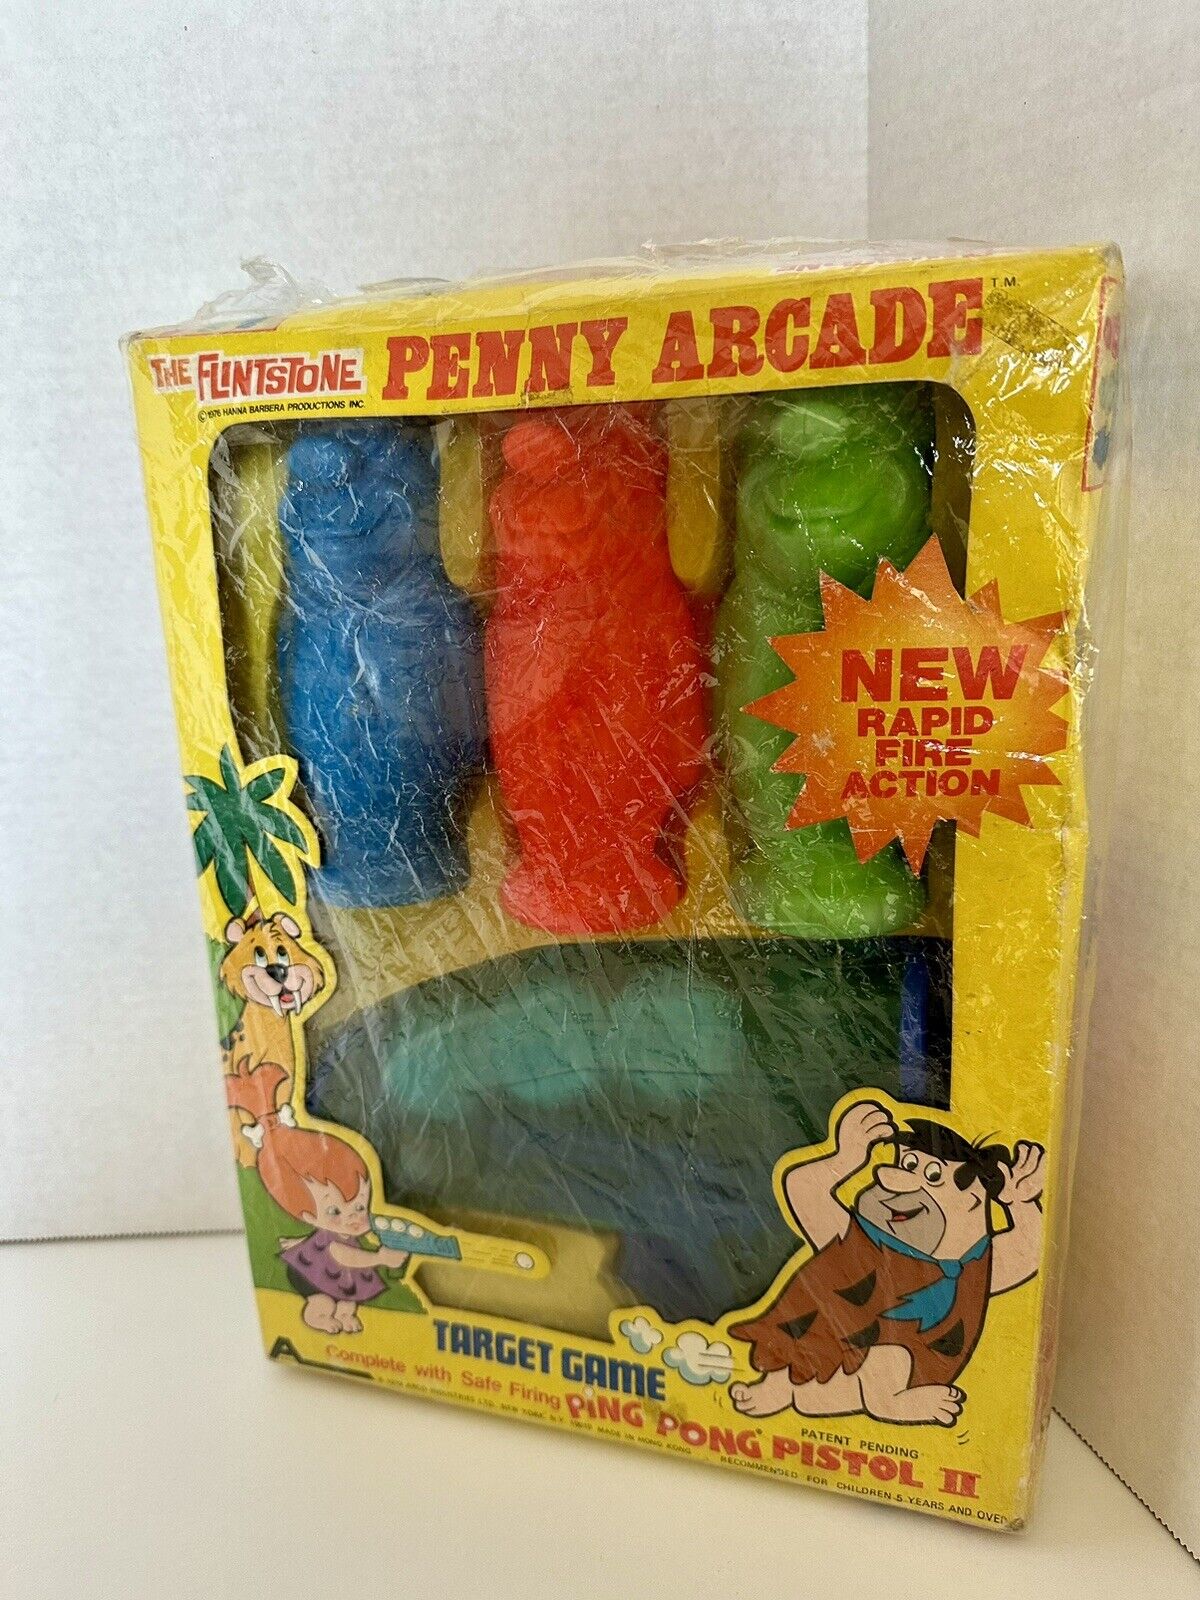 THE FLINTSTONES  PENNY ARCADE  TARGET GAME  1979  ARCO   BOXED  PING PONG PISTOL